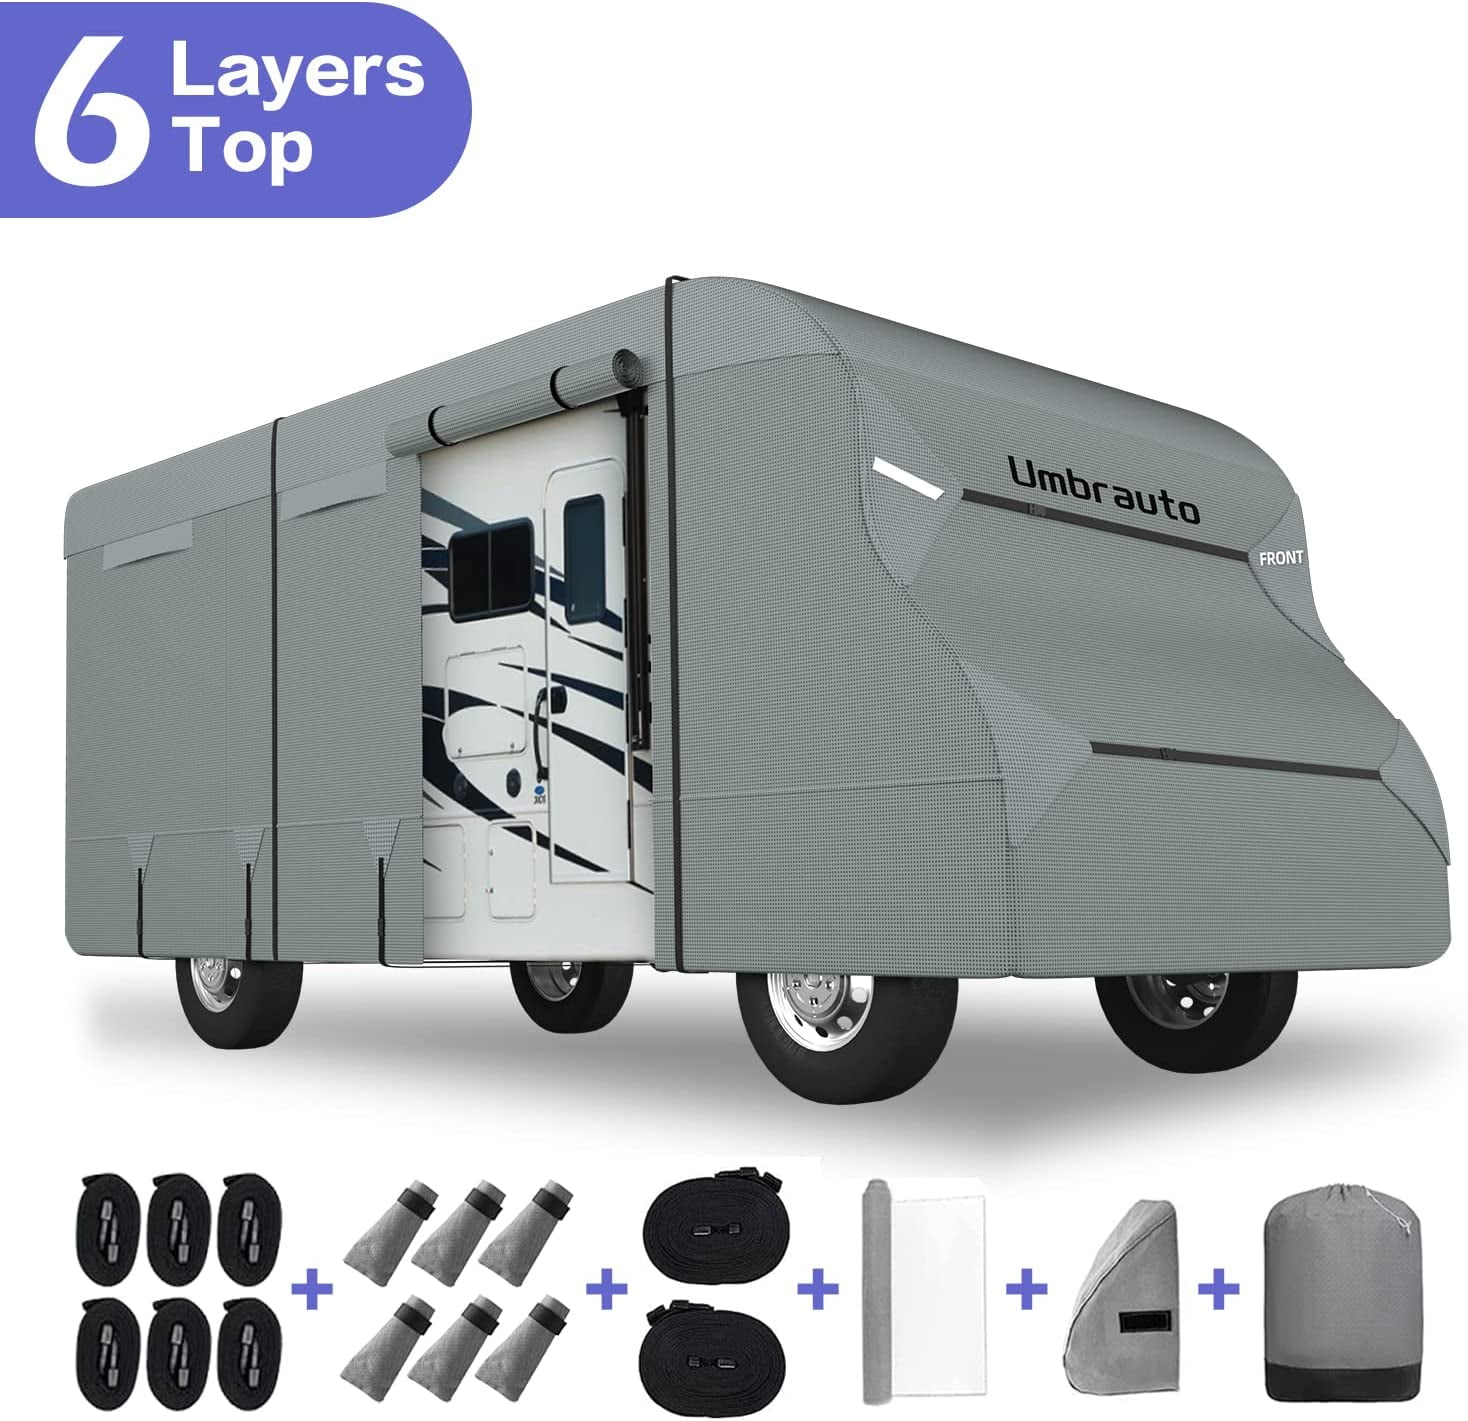 2 Windproof Straps RVMasking Heavy Duty 6 Layers Top Class C RV Cover for 26-29 Camper Trailer with 4 Tire Covers 